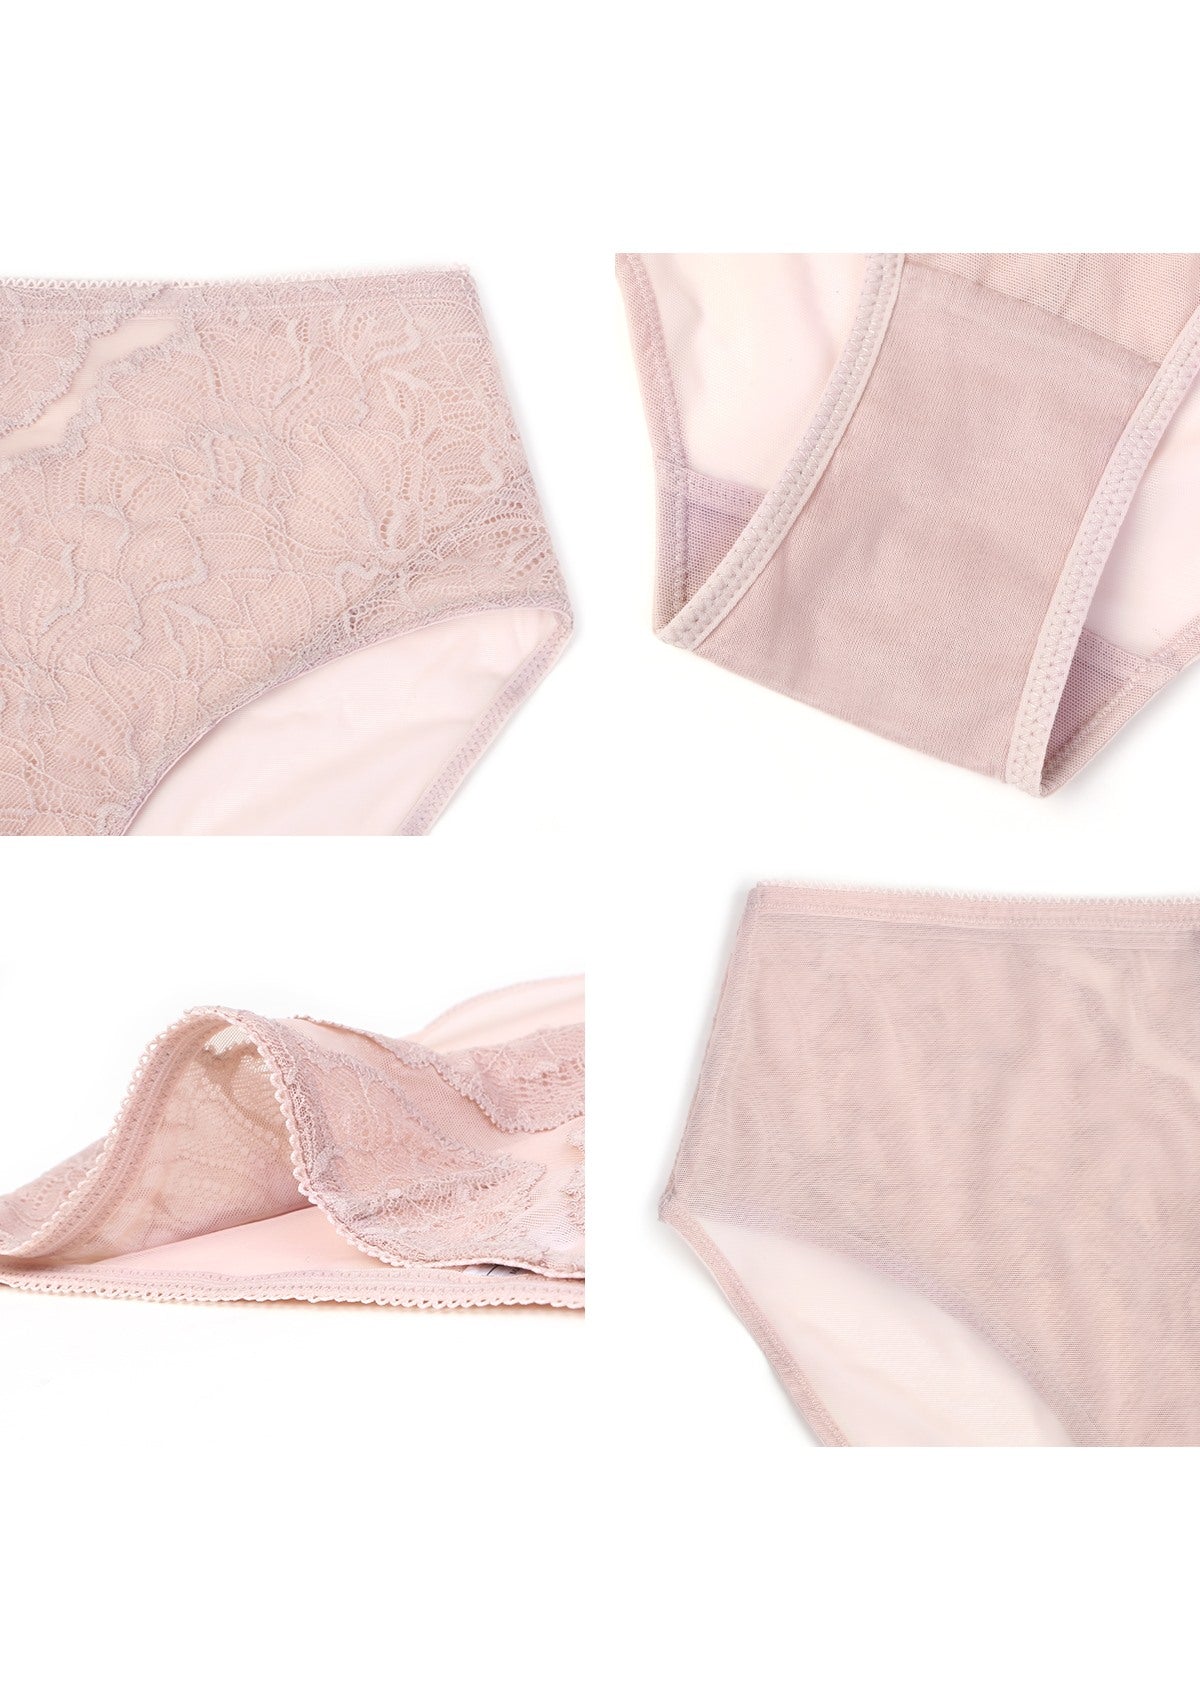 HSIA Blossom High-Rise Floral Lacy Panty-Comfort In Style - XXXL / Dark Pink